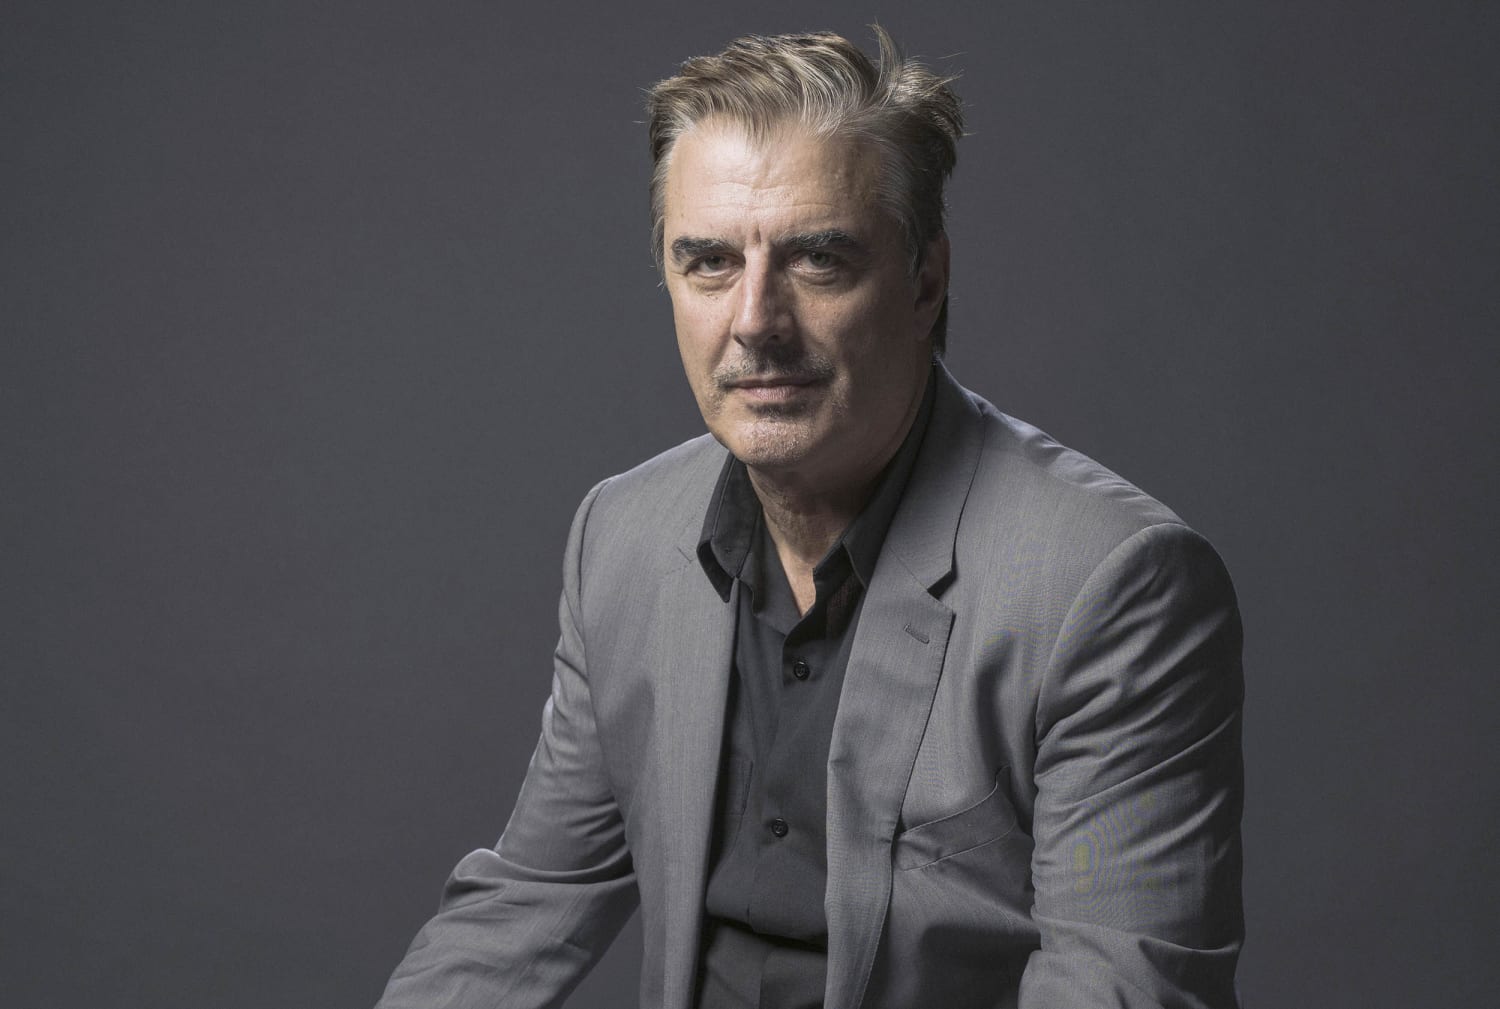 Chris Noth addresses sexual assault allegations in first interview